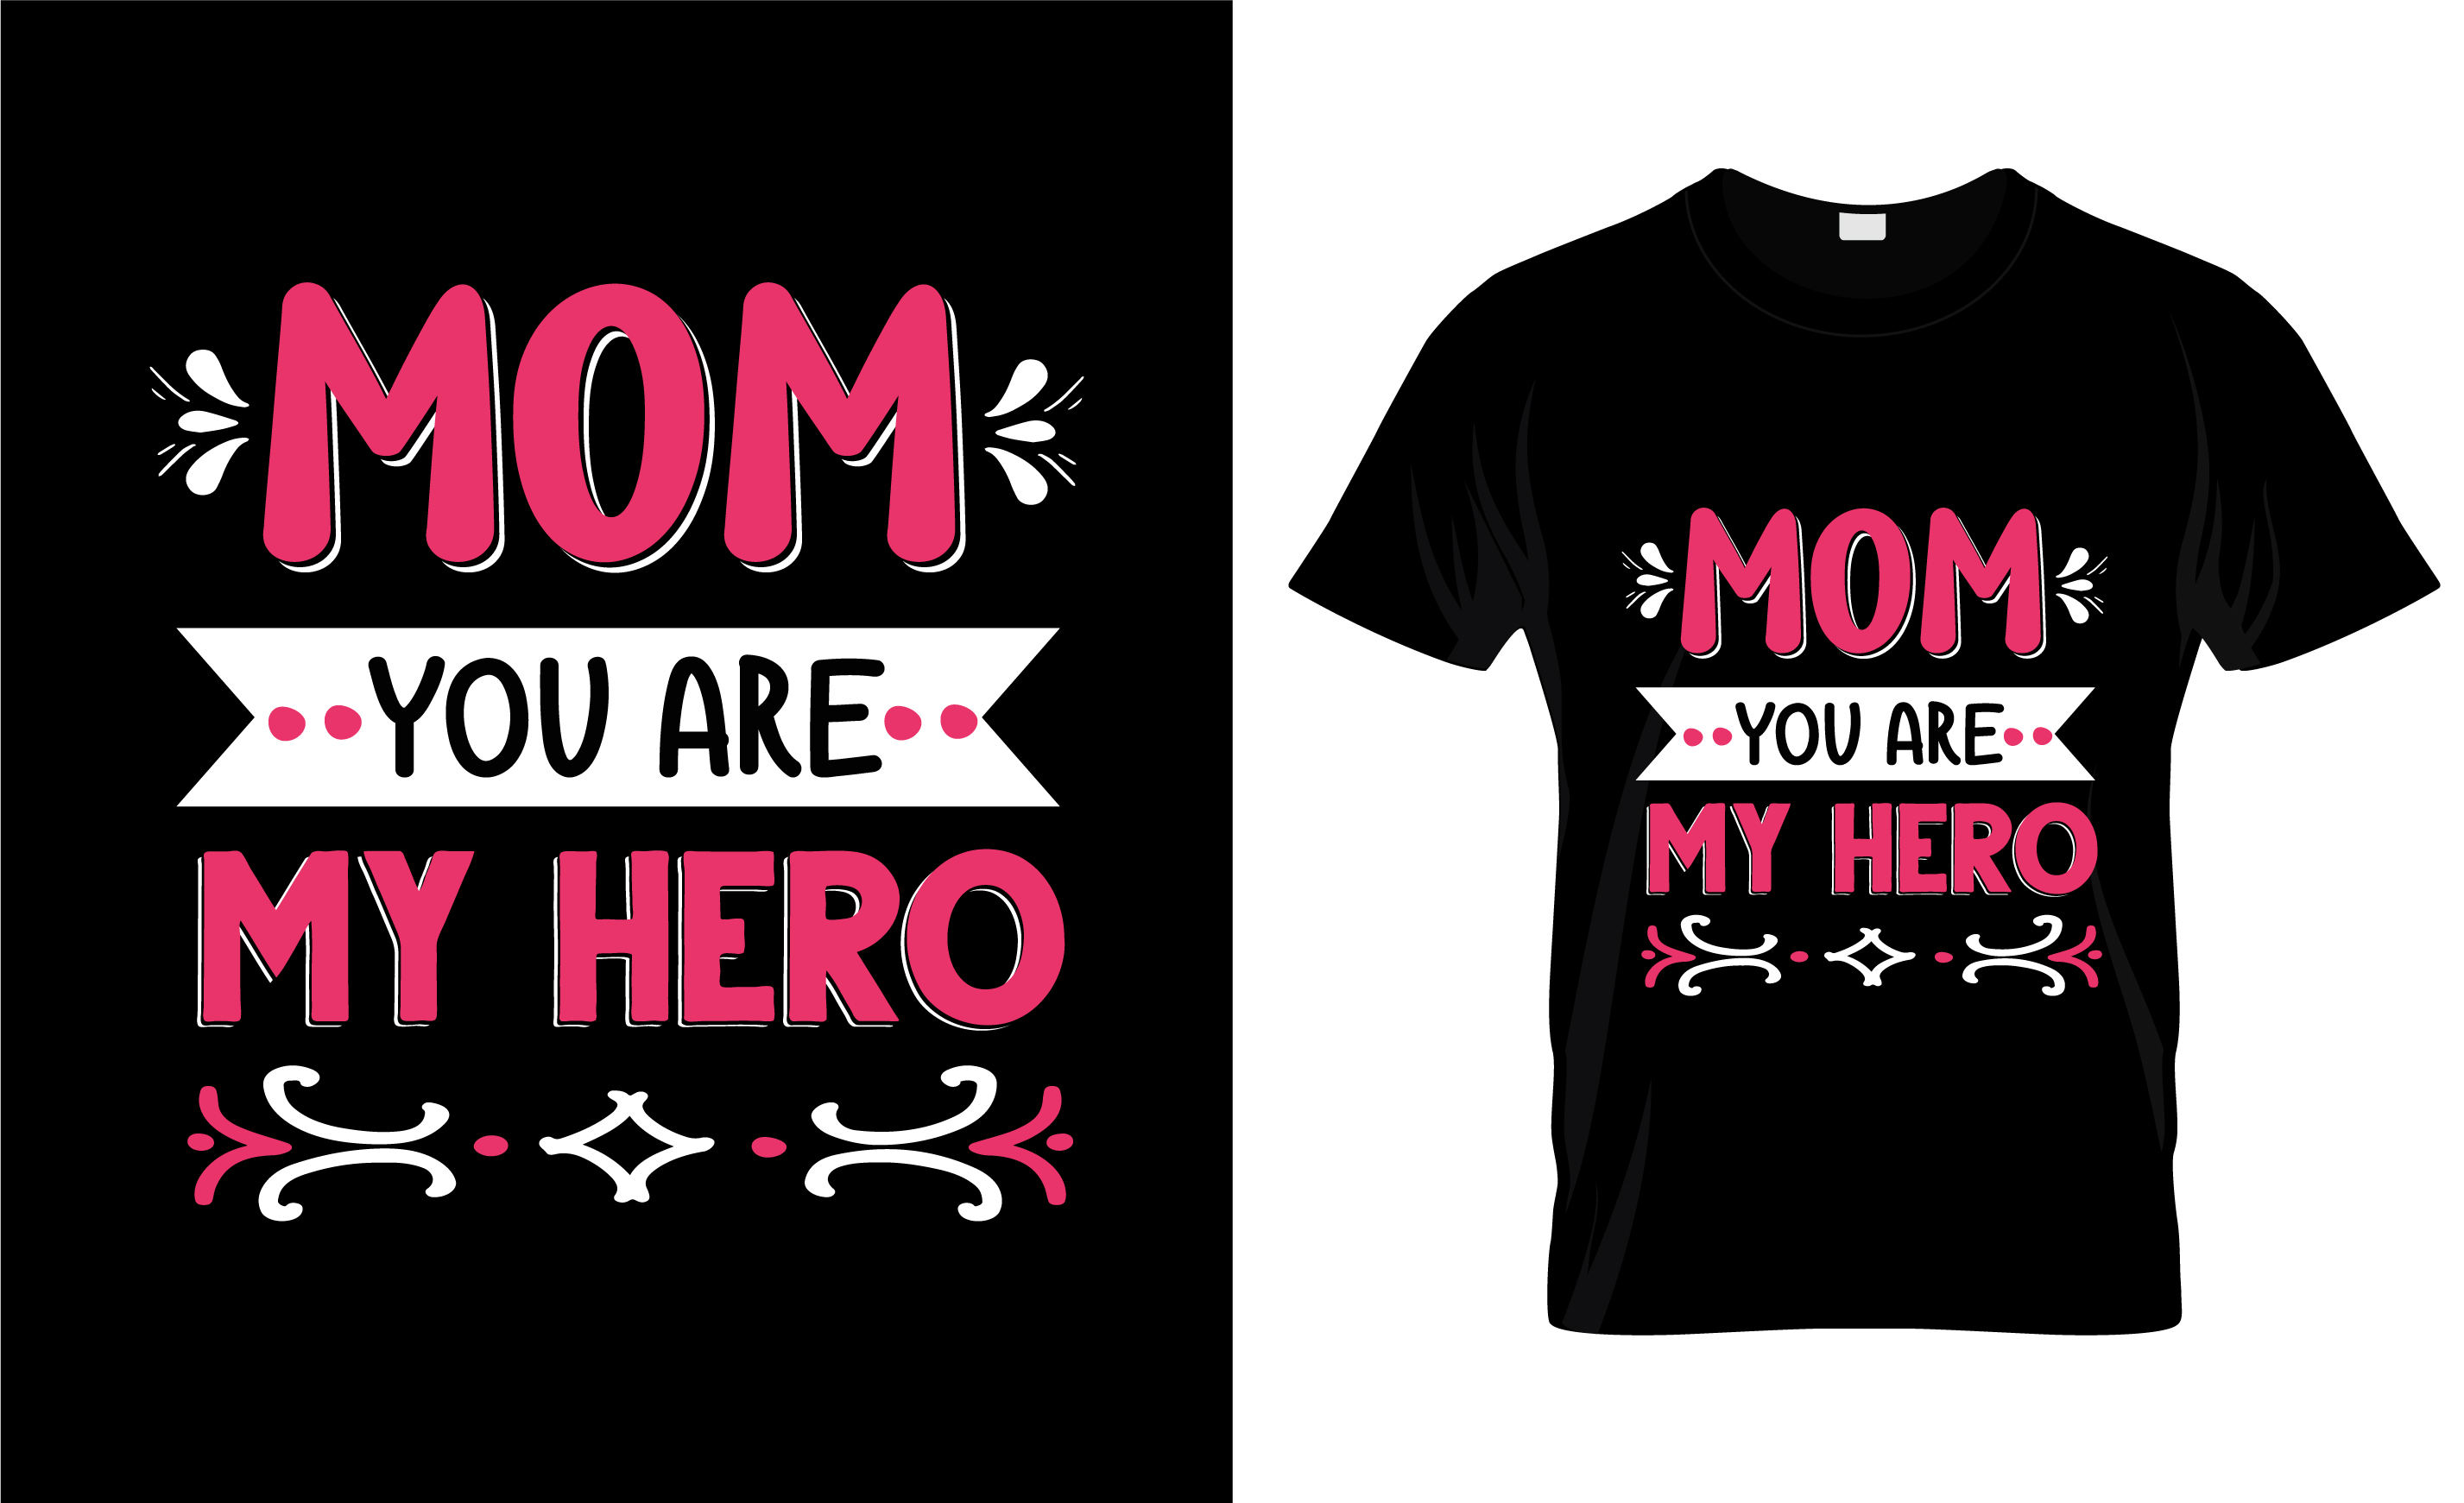 Image of a black t-shirt with a gorgeous red and white print about mom.